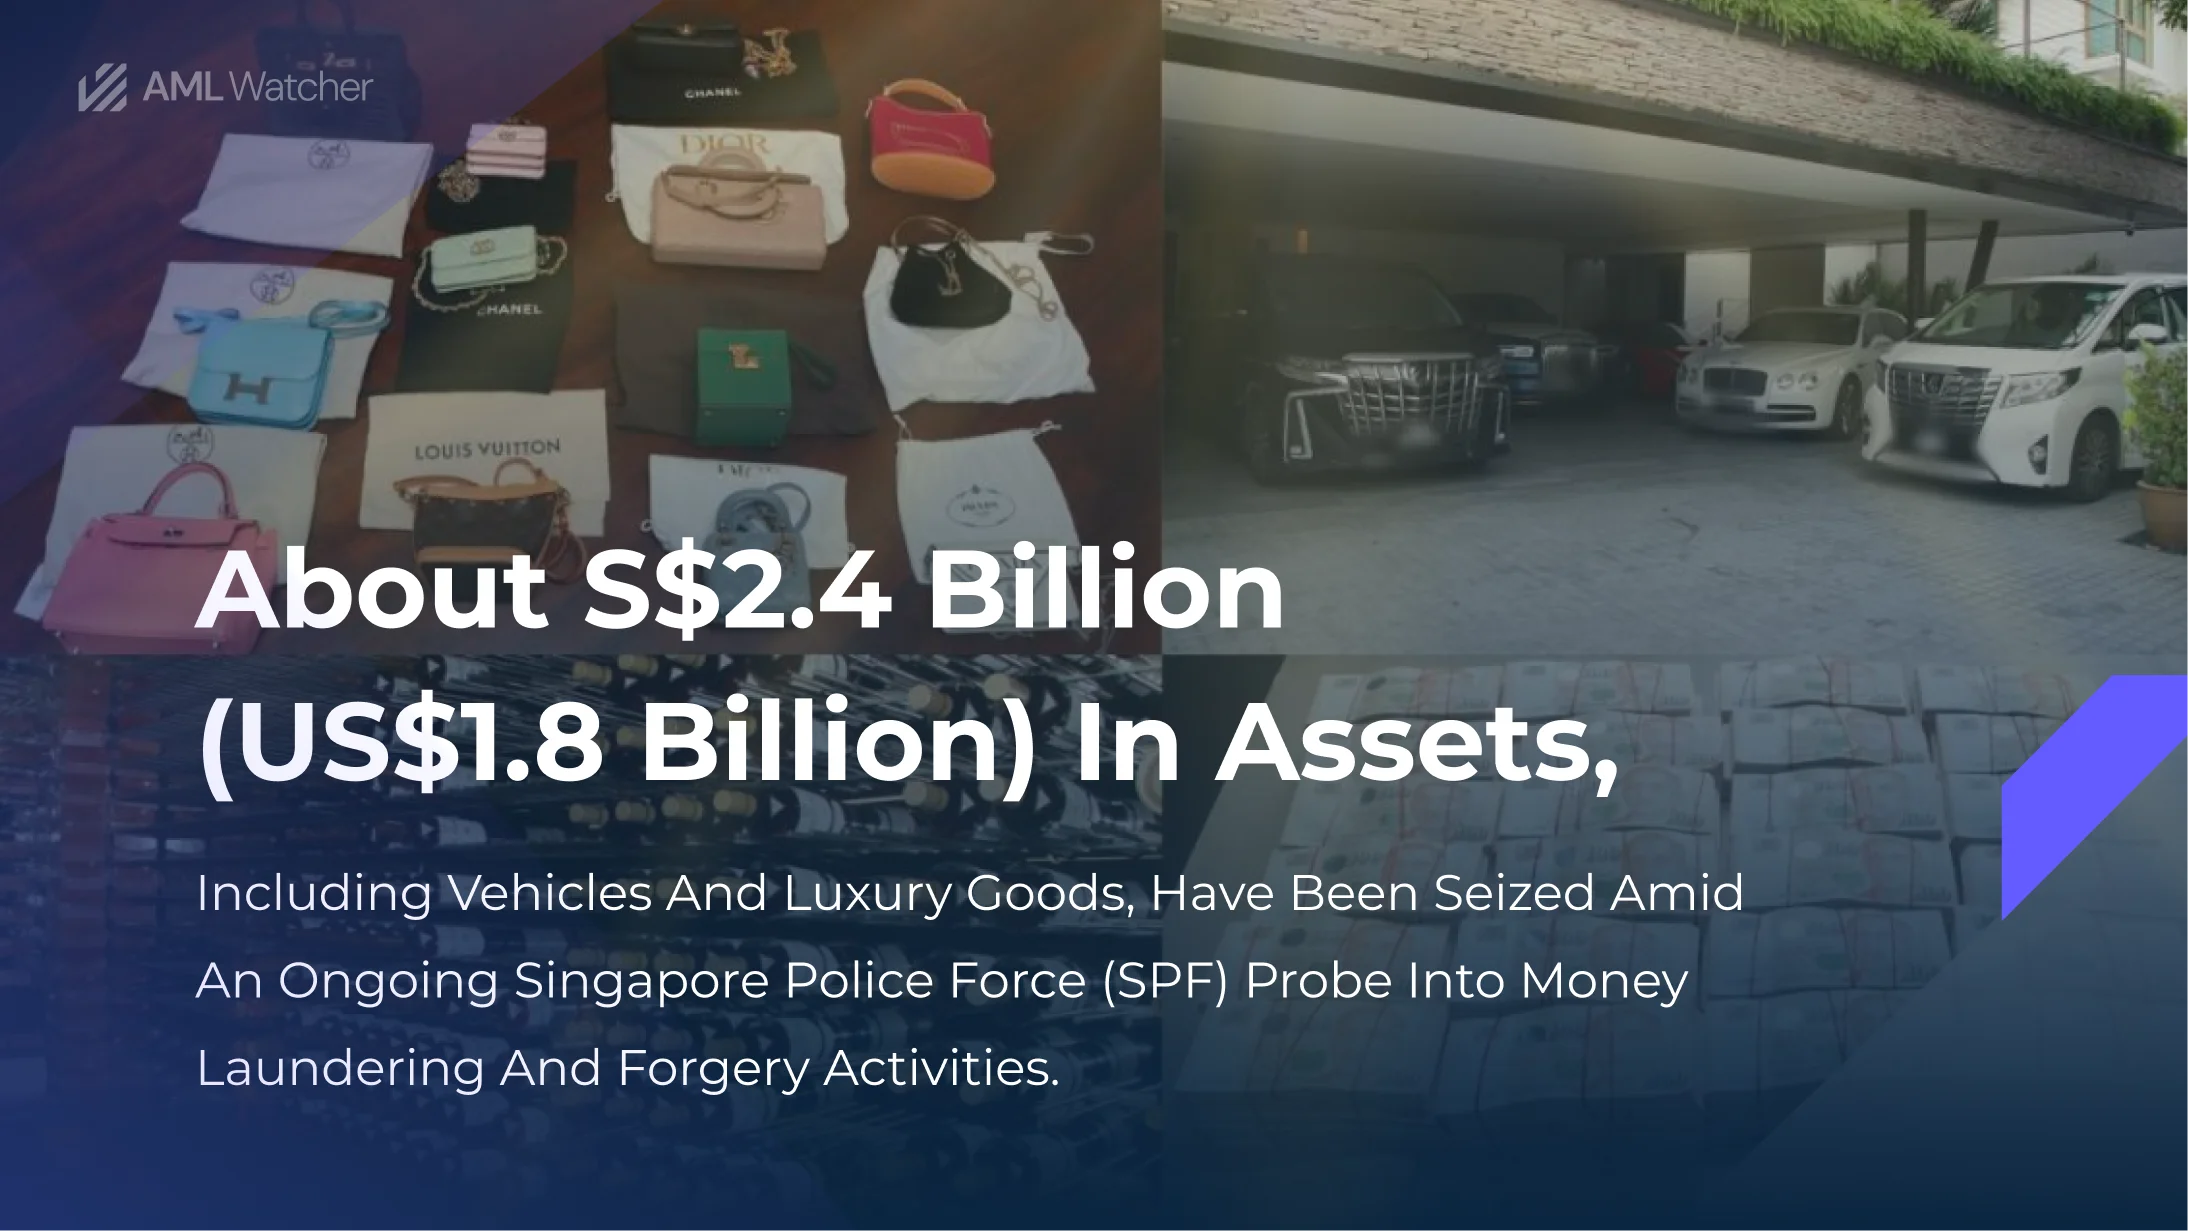 Assets seized worth around S$2.4 billion, including vehicles and luxury goods.